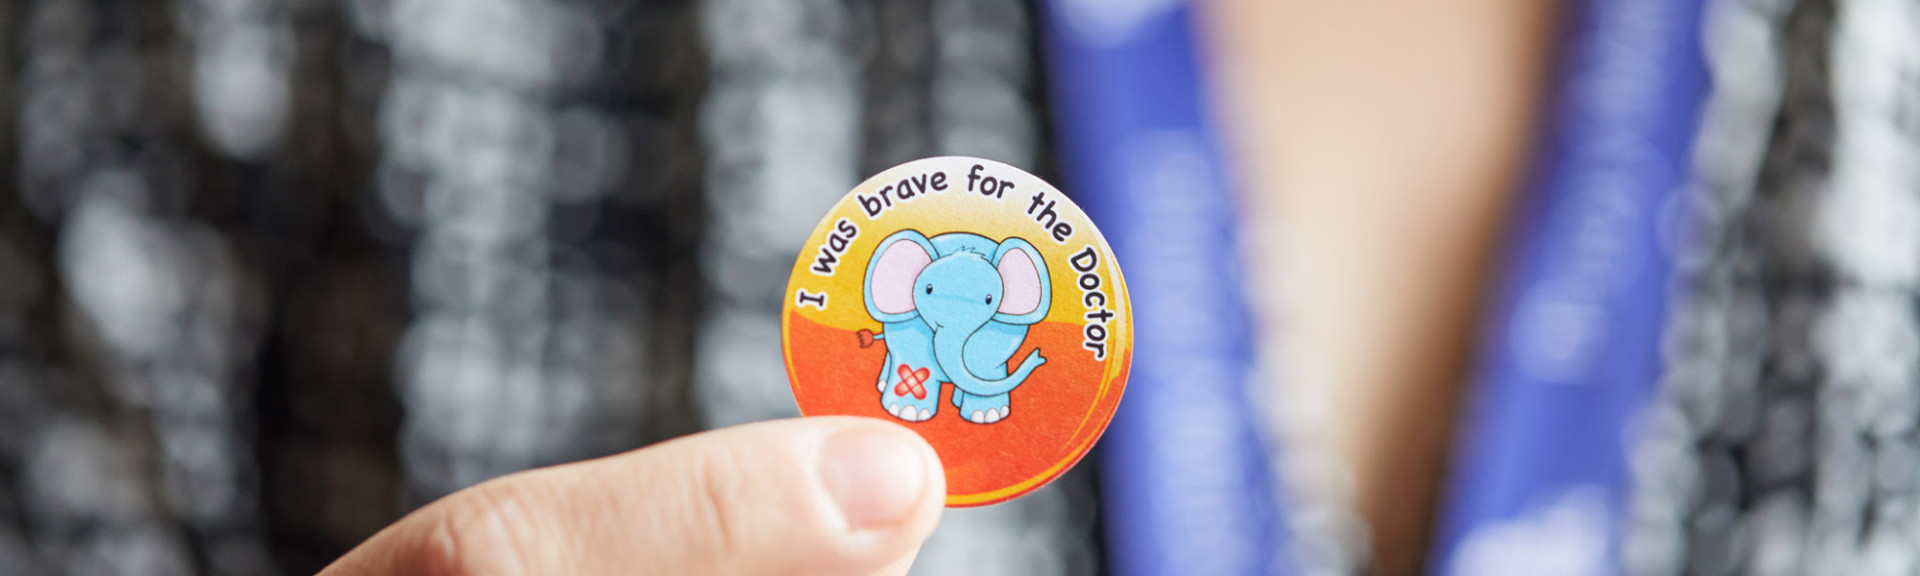 A photo showing an “I was brave for the doctor” sticker